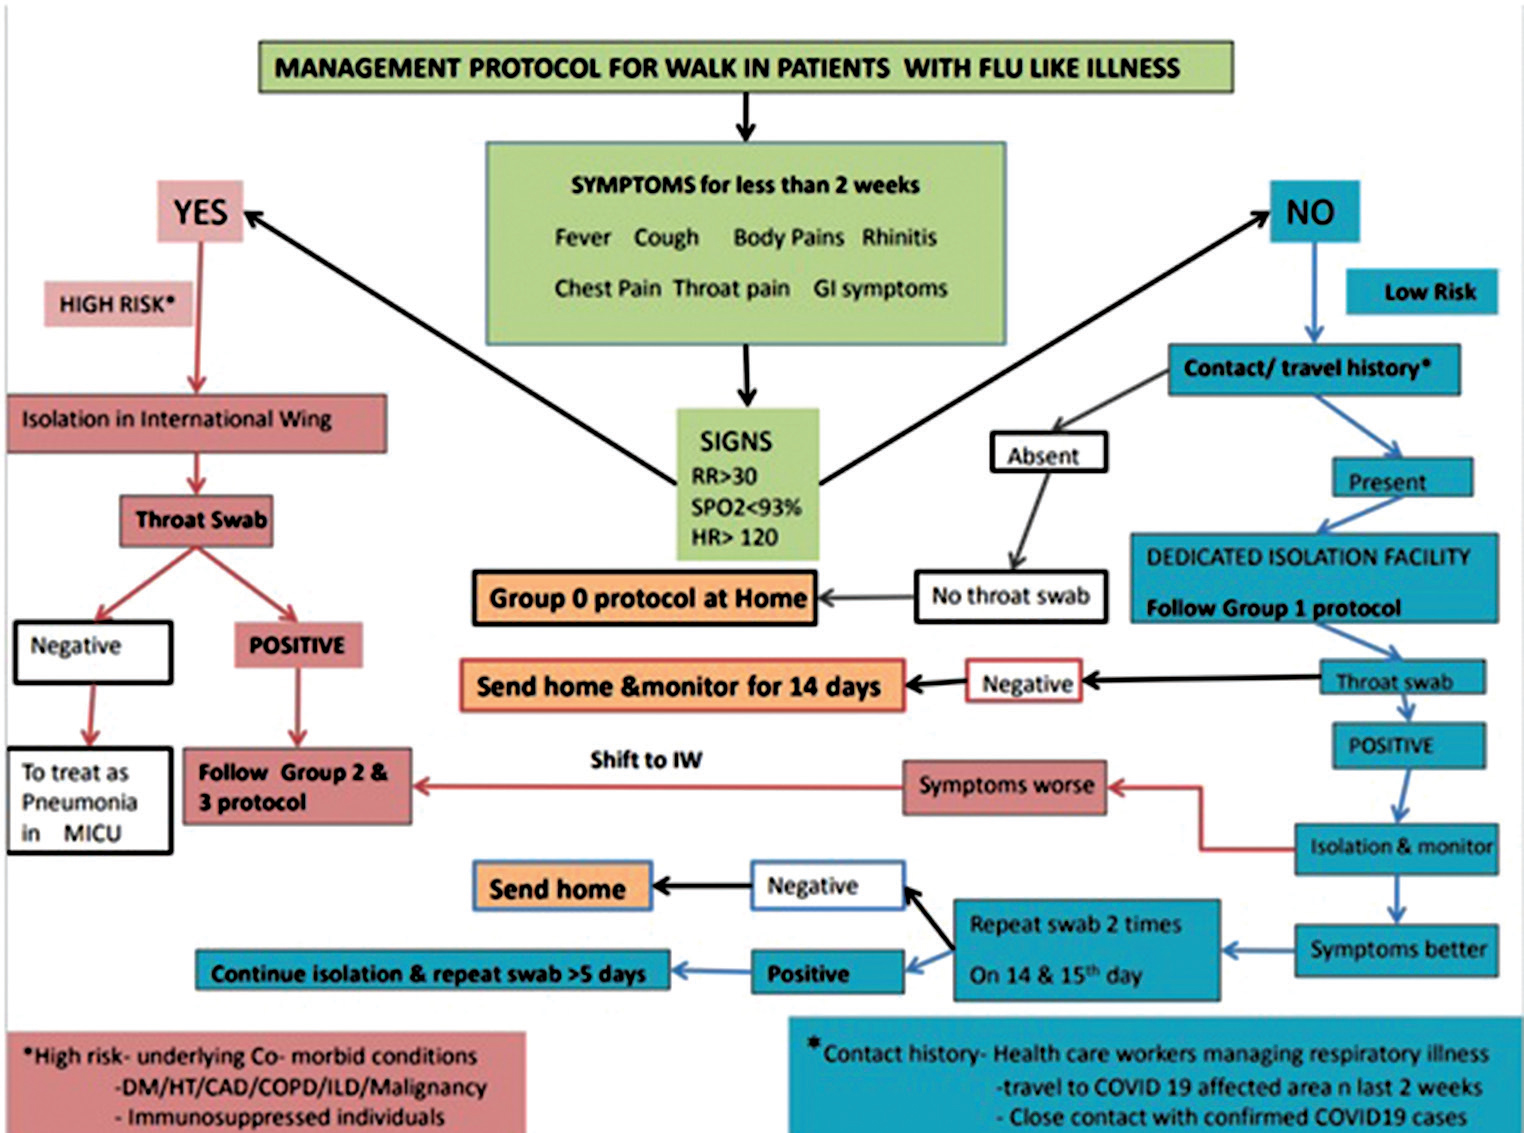 Management protocol for walk-in patients with flu-like illness.